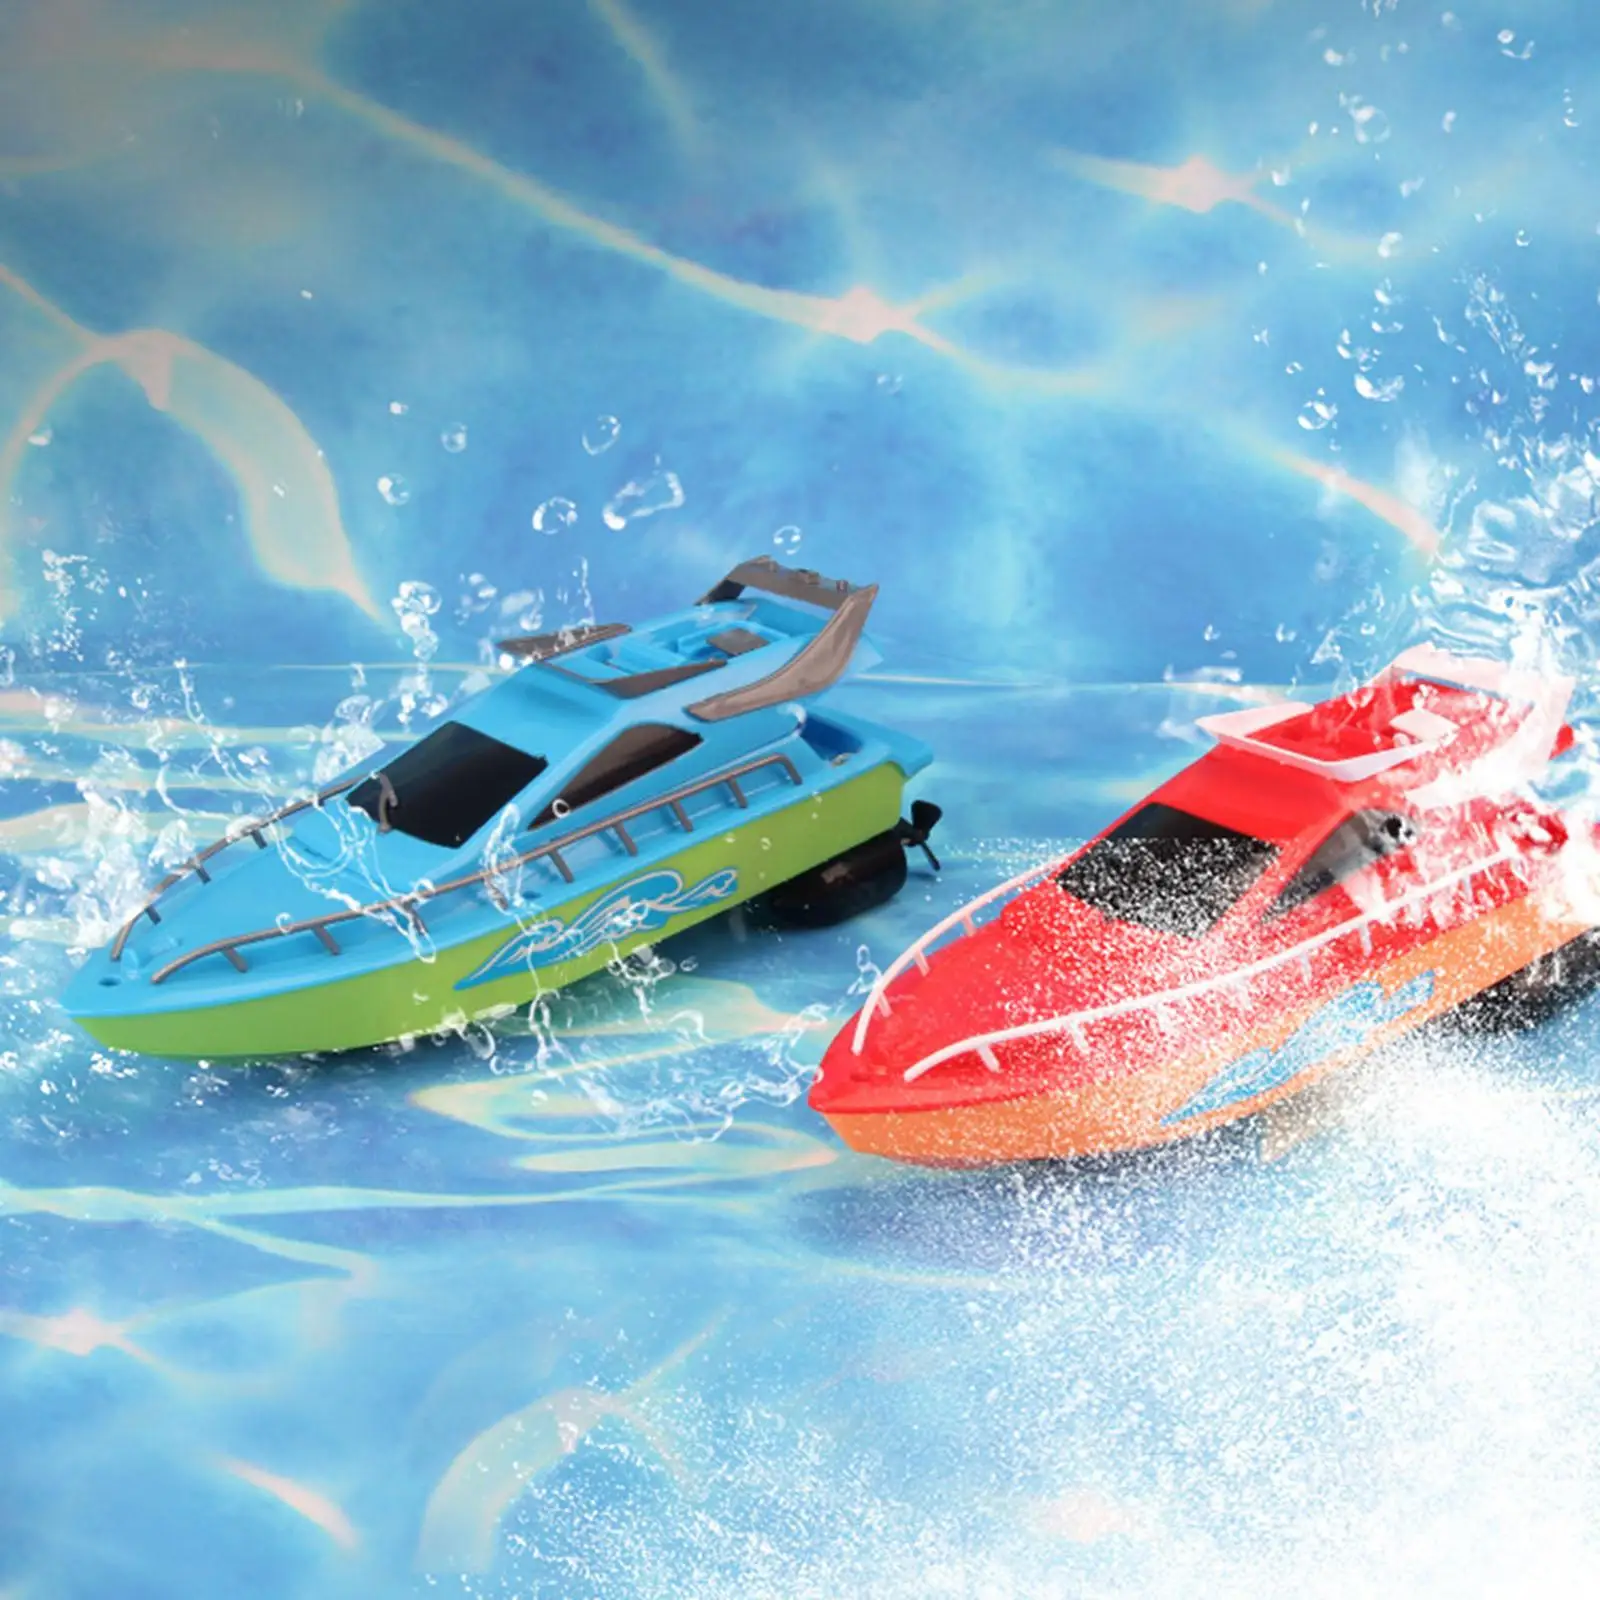 Wireless RC Racing Boat Ship Toy Electric Plastic for Kids Adult Children